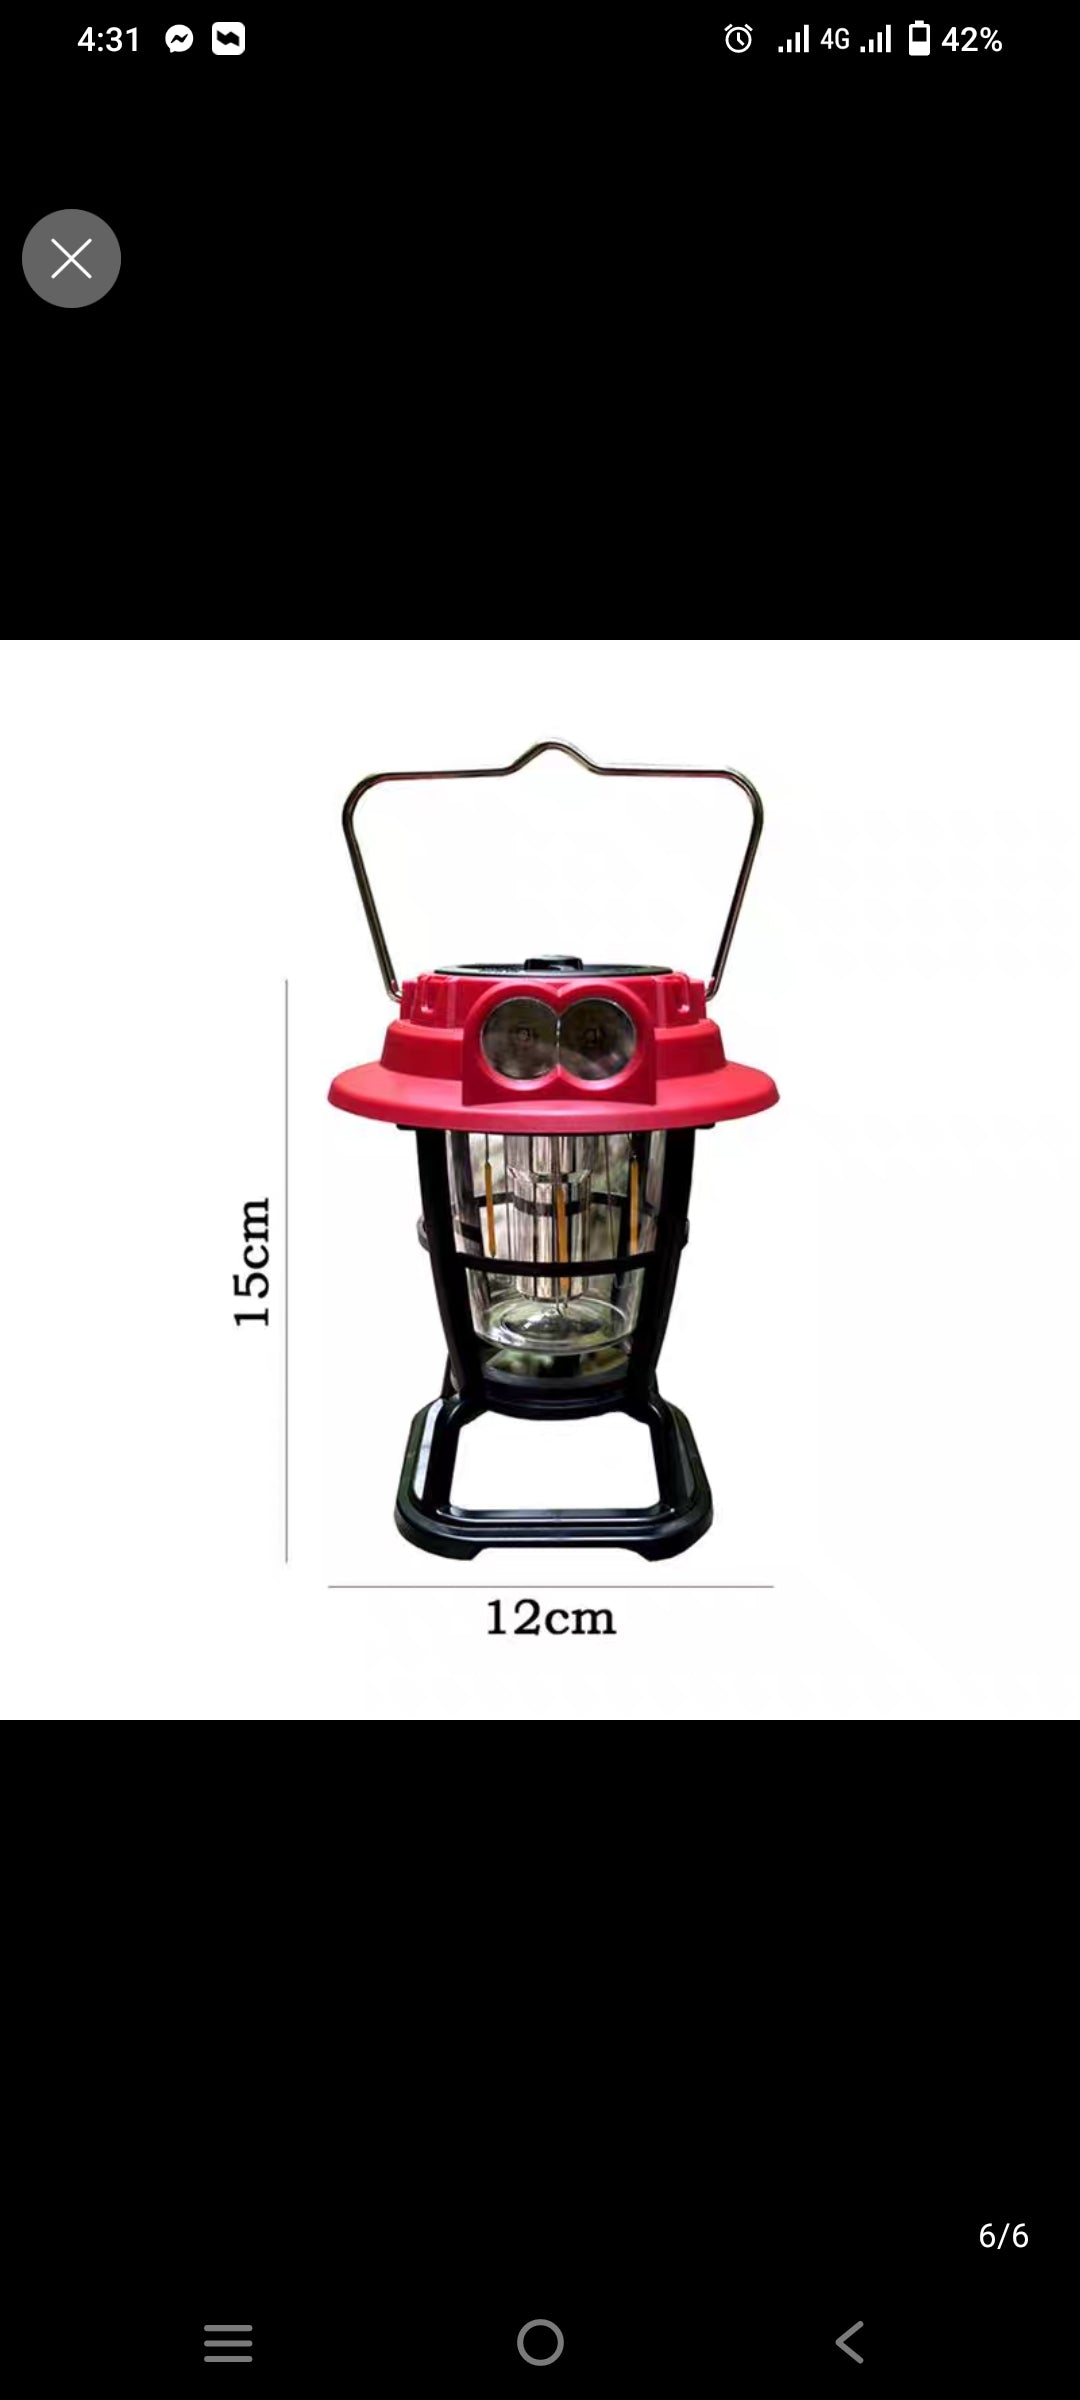 Multifunctional Solar LED Portable Camping Light 200LM Rechargeable